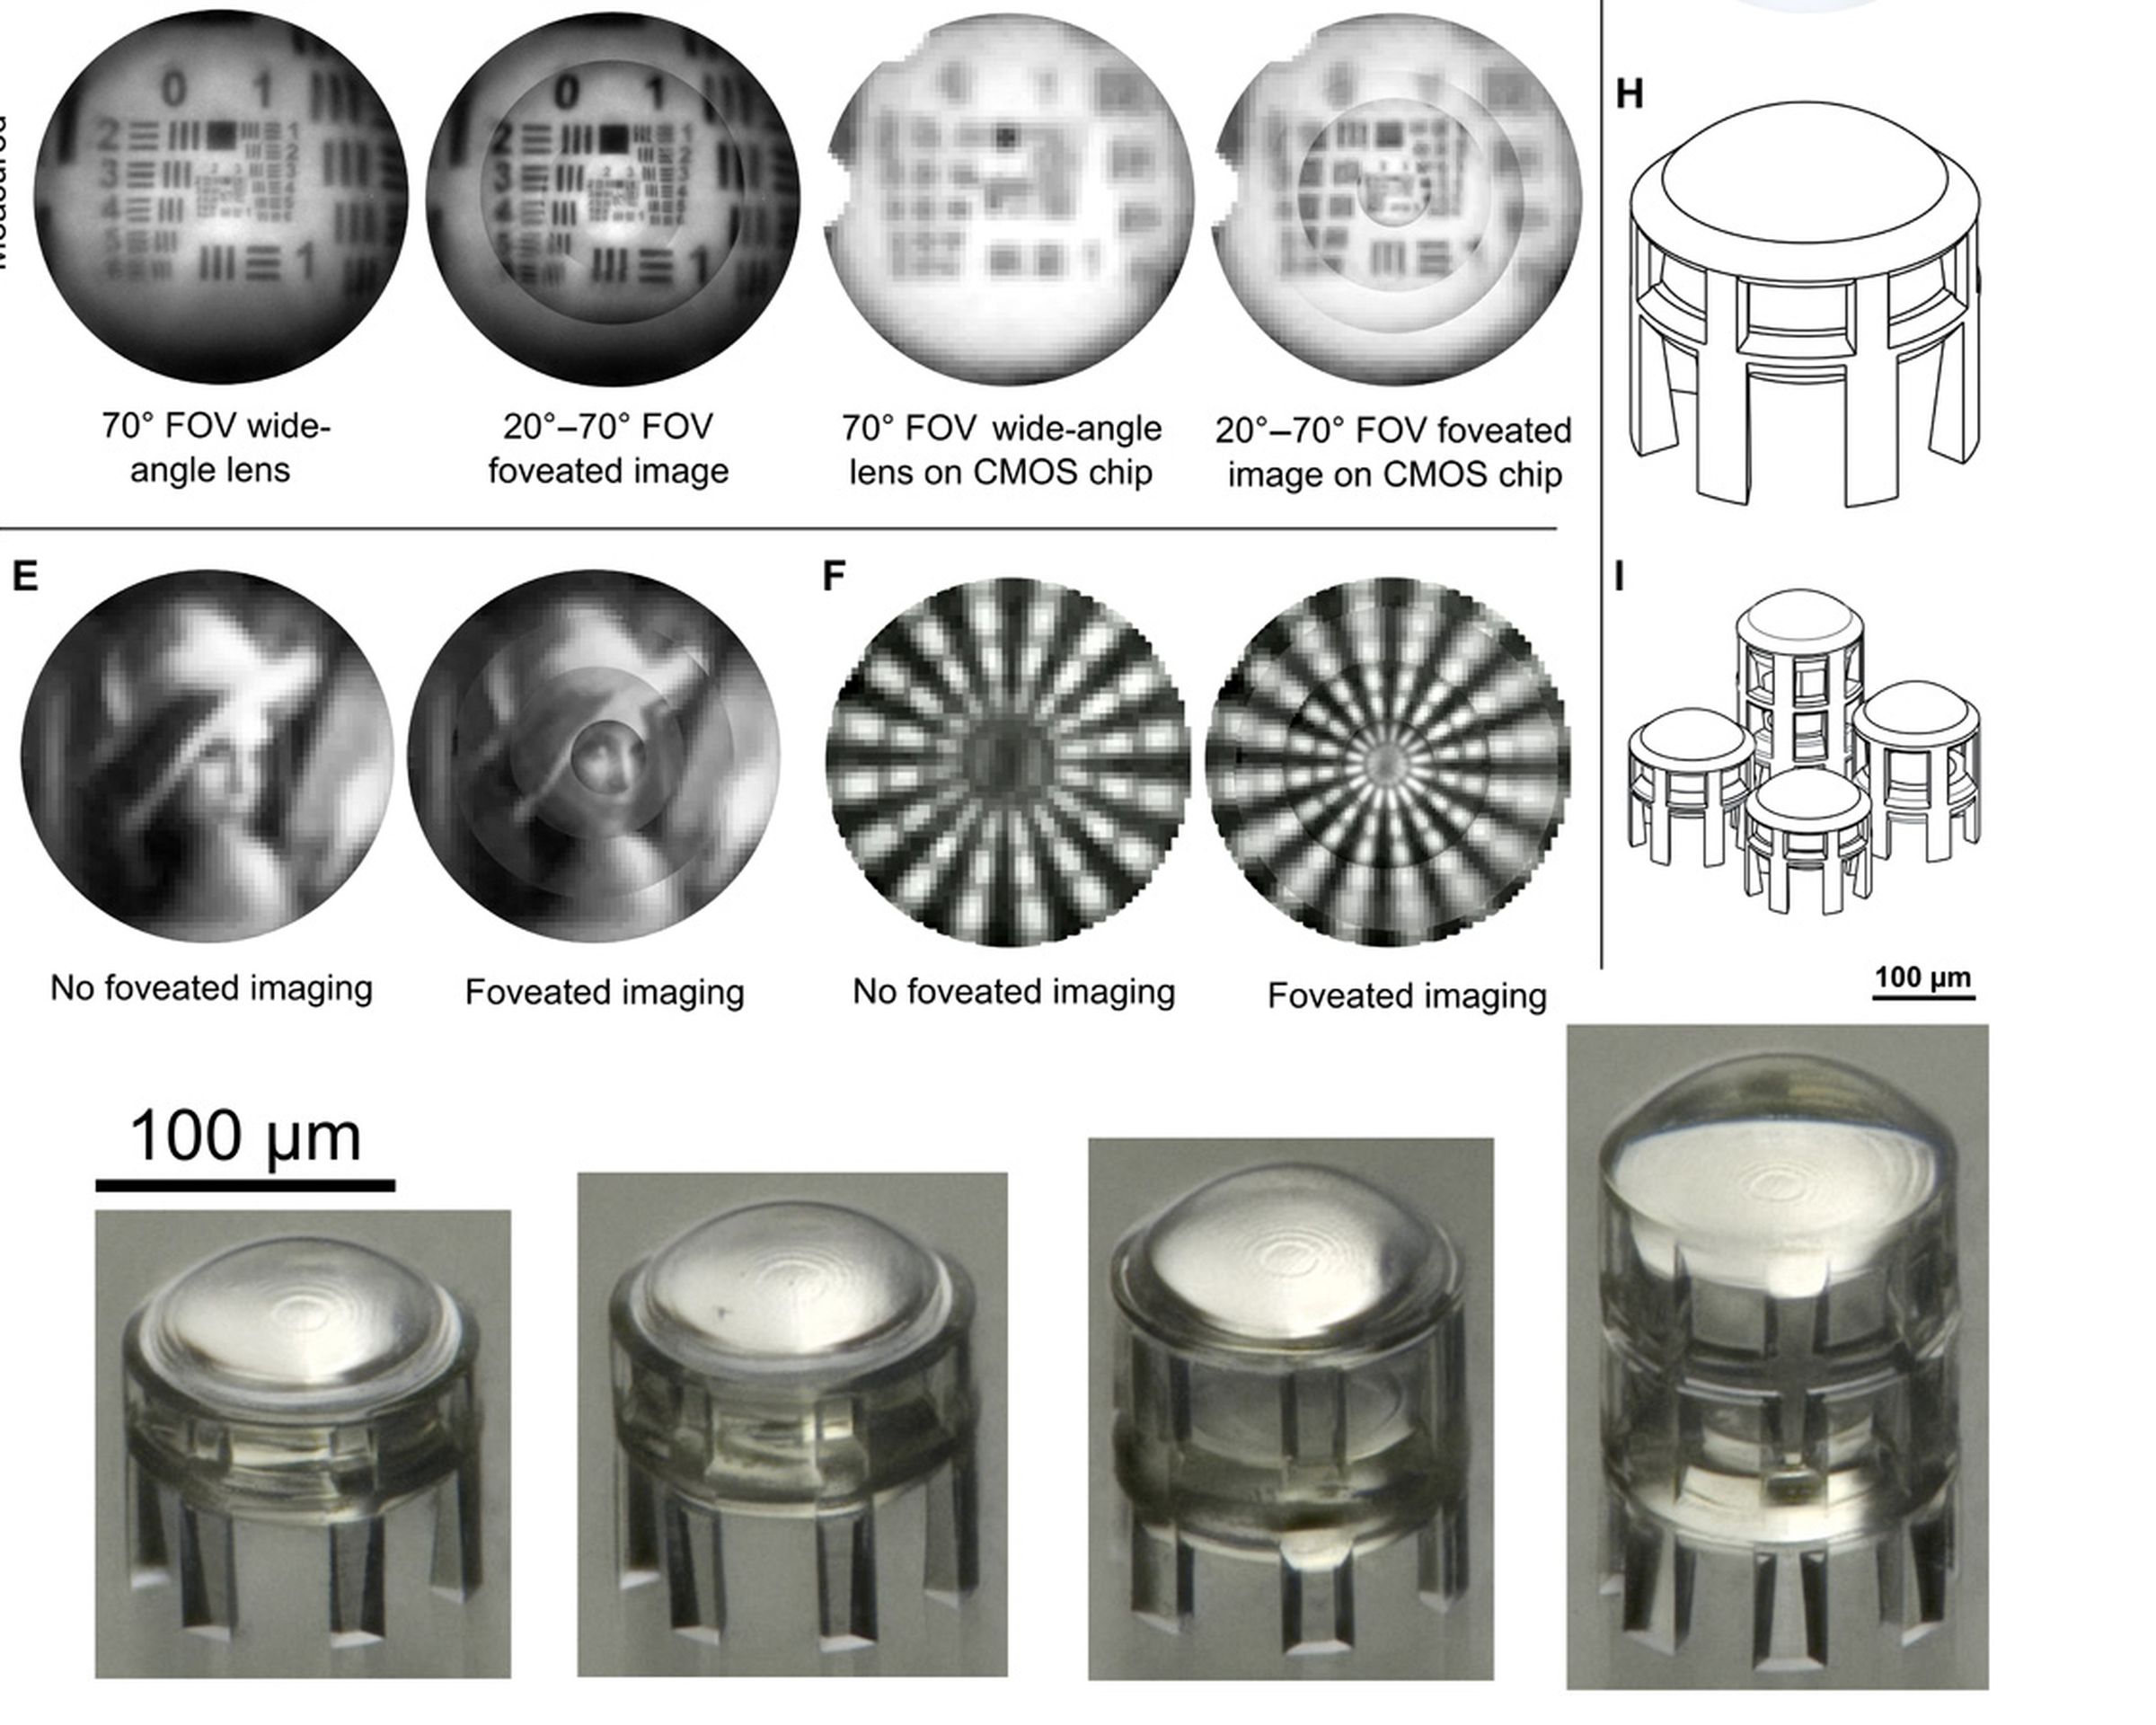 Pictures and illustrations showing how the foveated lenses differ in focus, and what the lenses themselves look like.